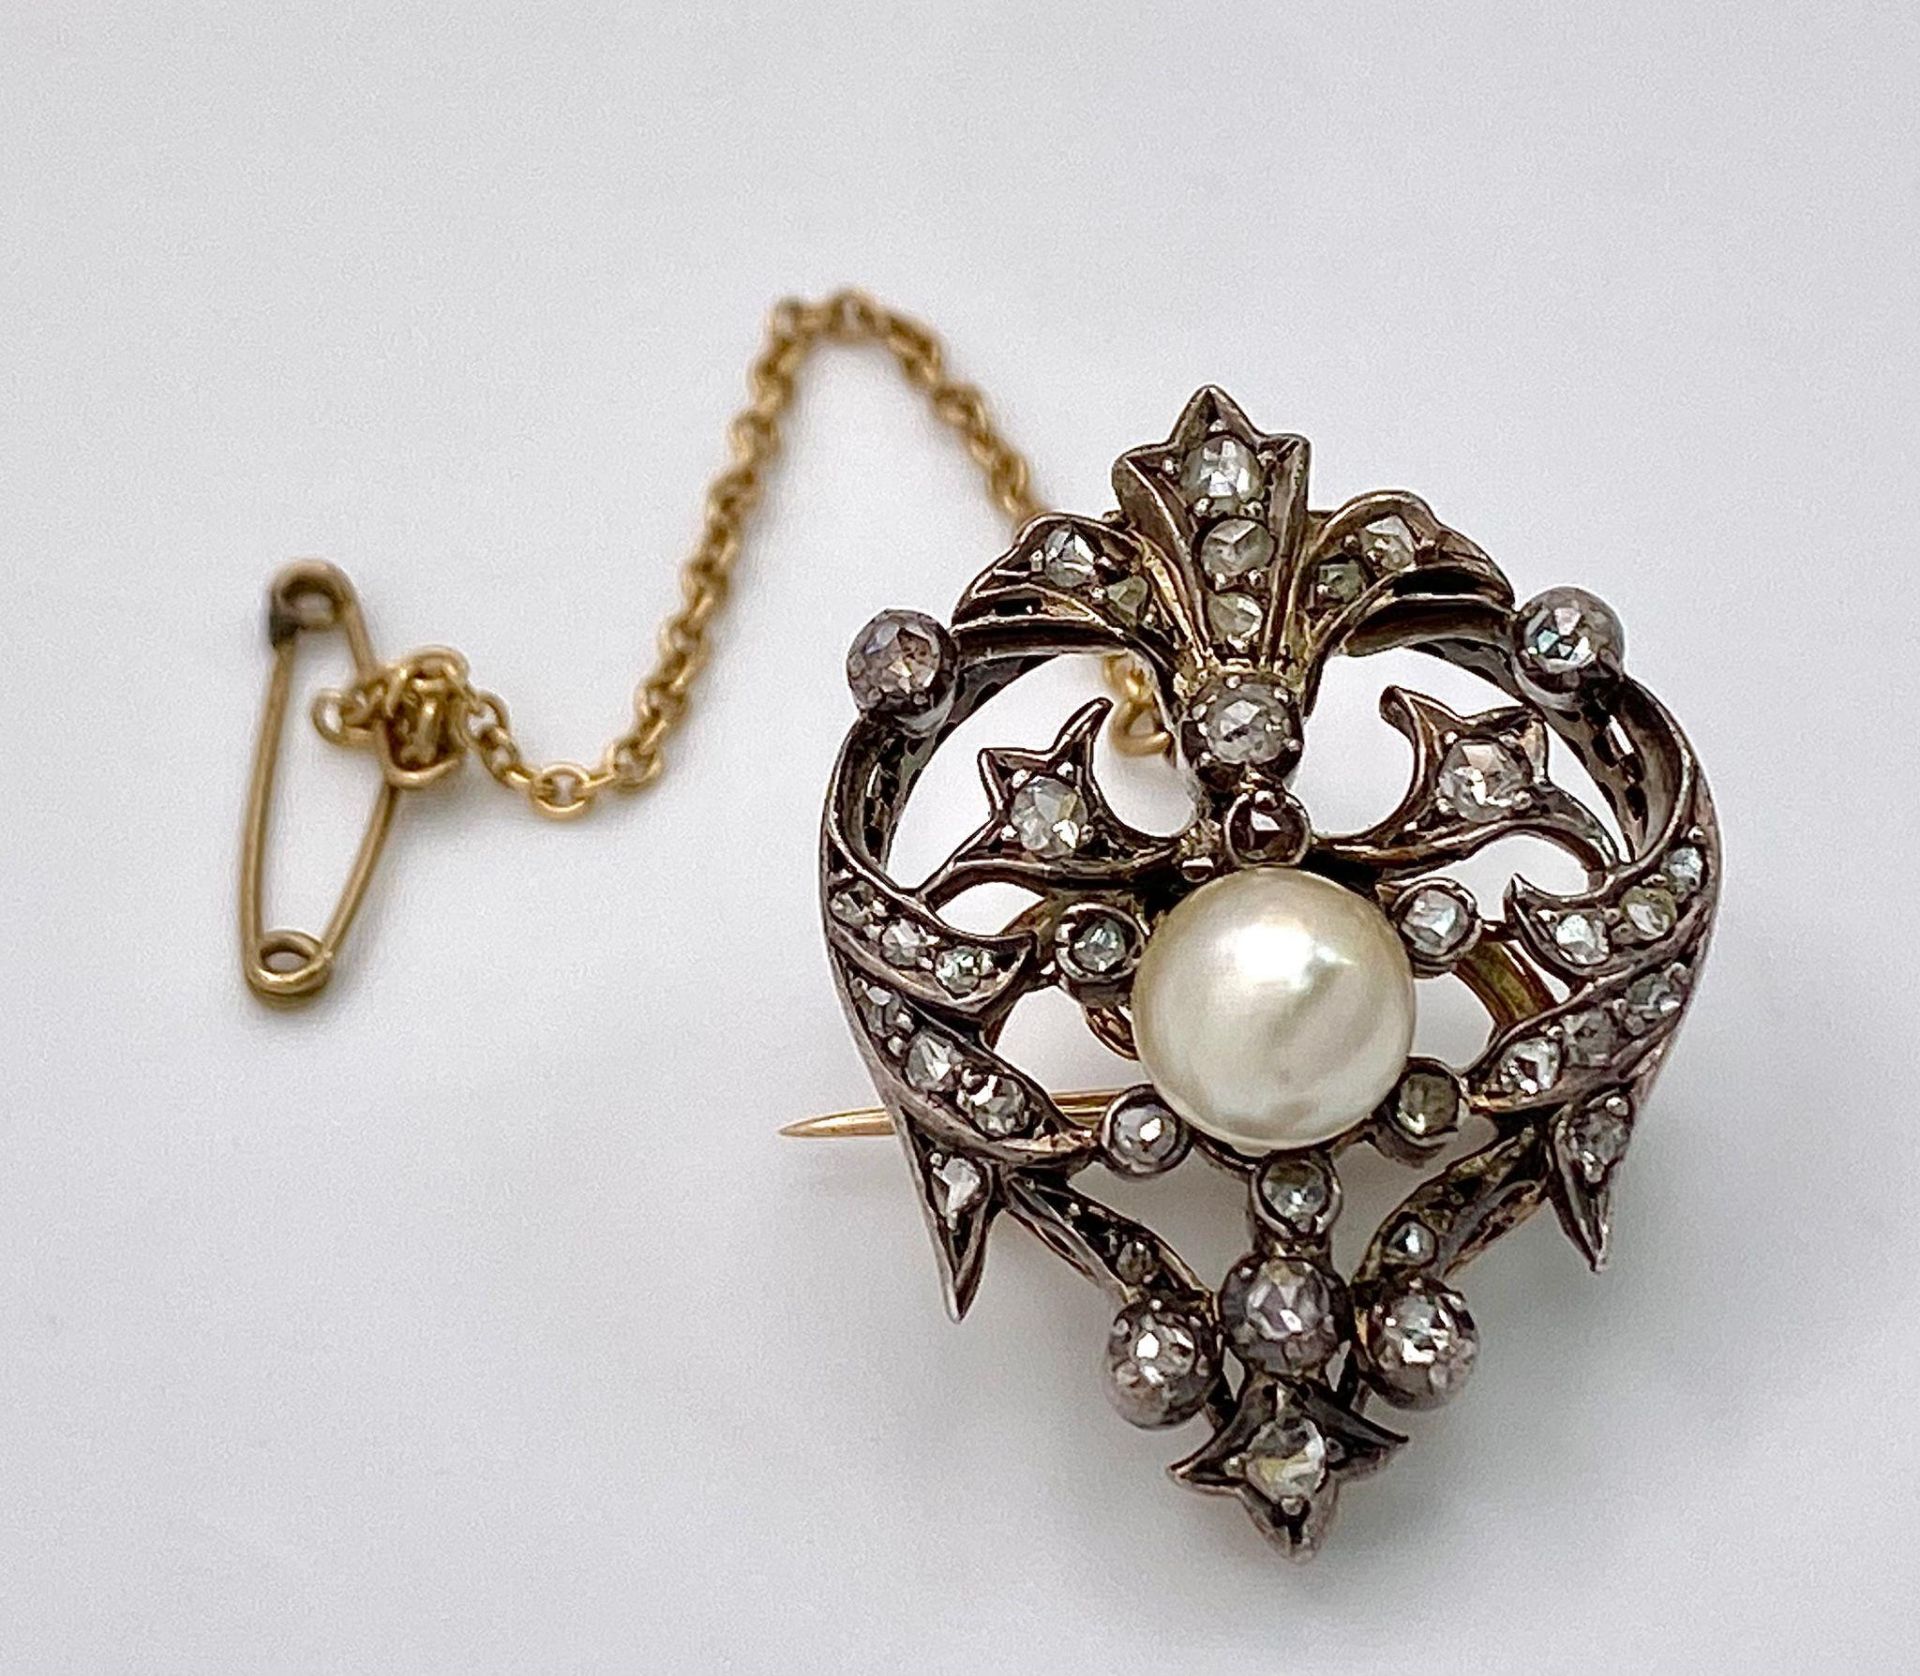 A Wonderful Antique Victorian Gold, Silver, Pearl and diamond Brooch. A rich mid-karat gold base